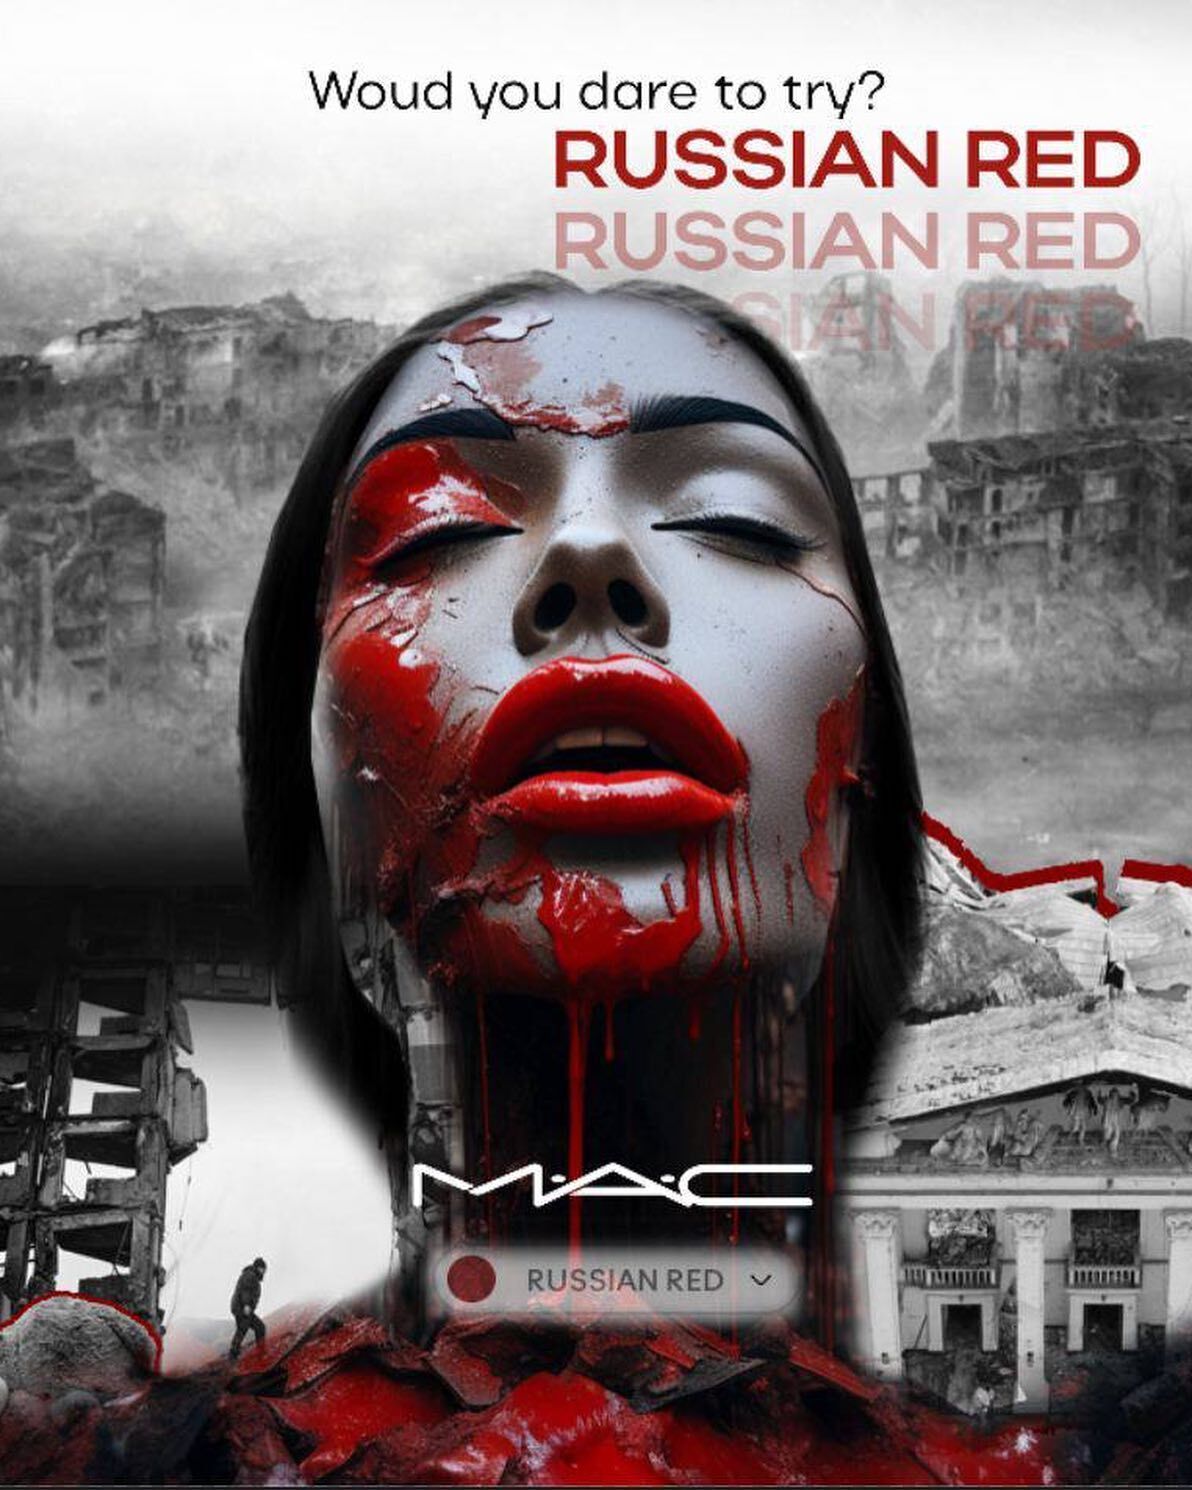 ''This is not a shade, but the blood of Ukrainians.'' The Ministry of Foreign Affairs of Ukraine addressed the world through the Russian Red lipstick by MAC Cosmetics